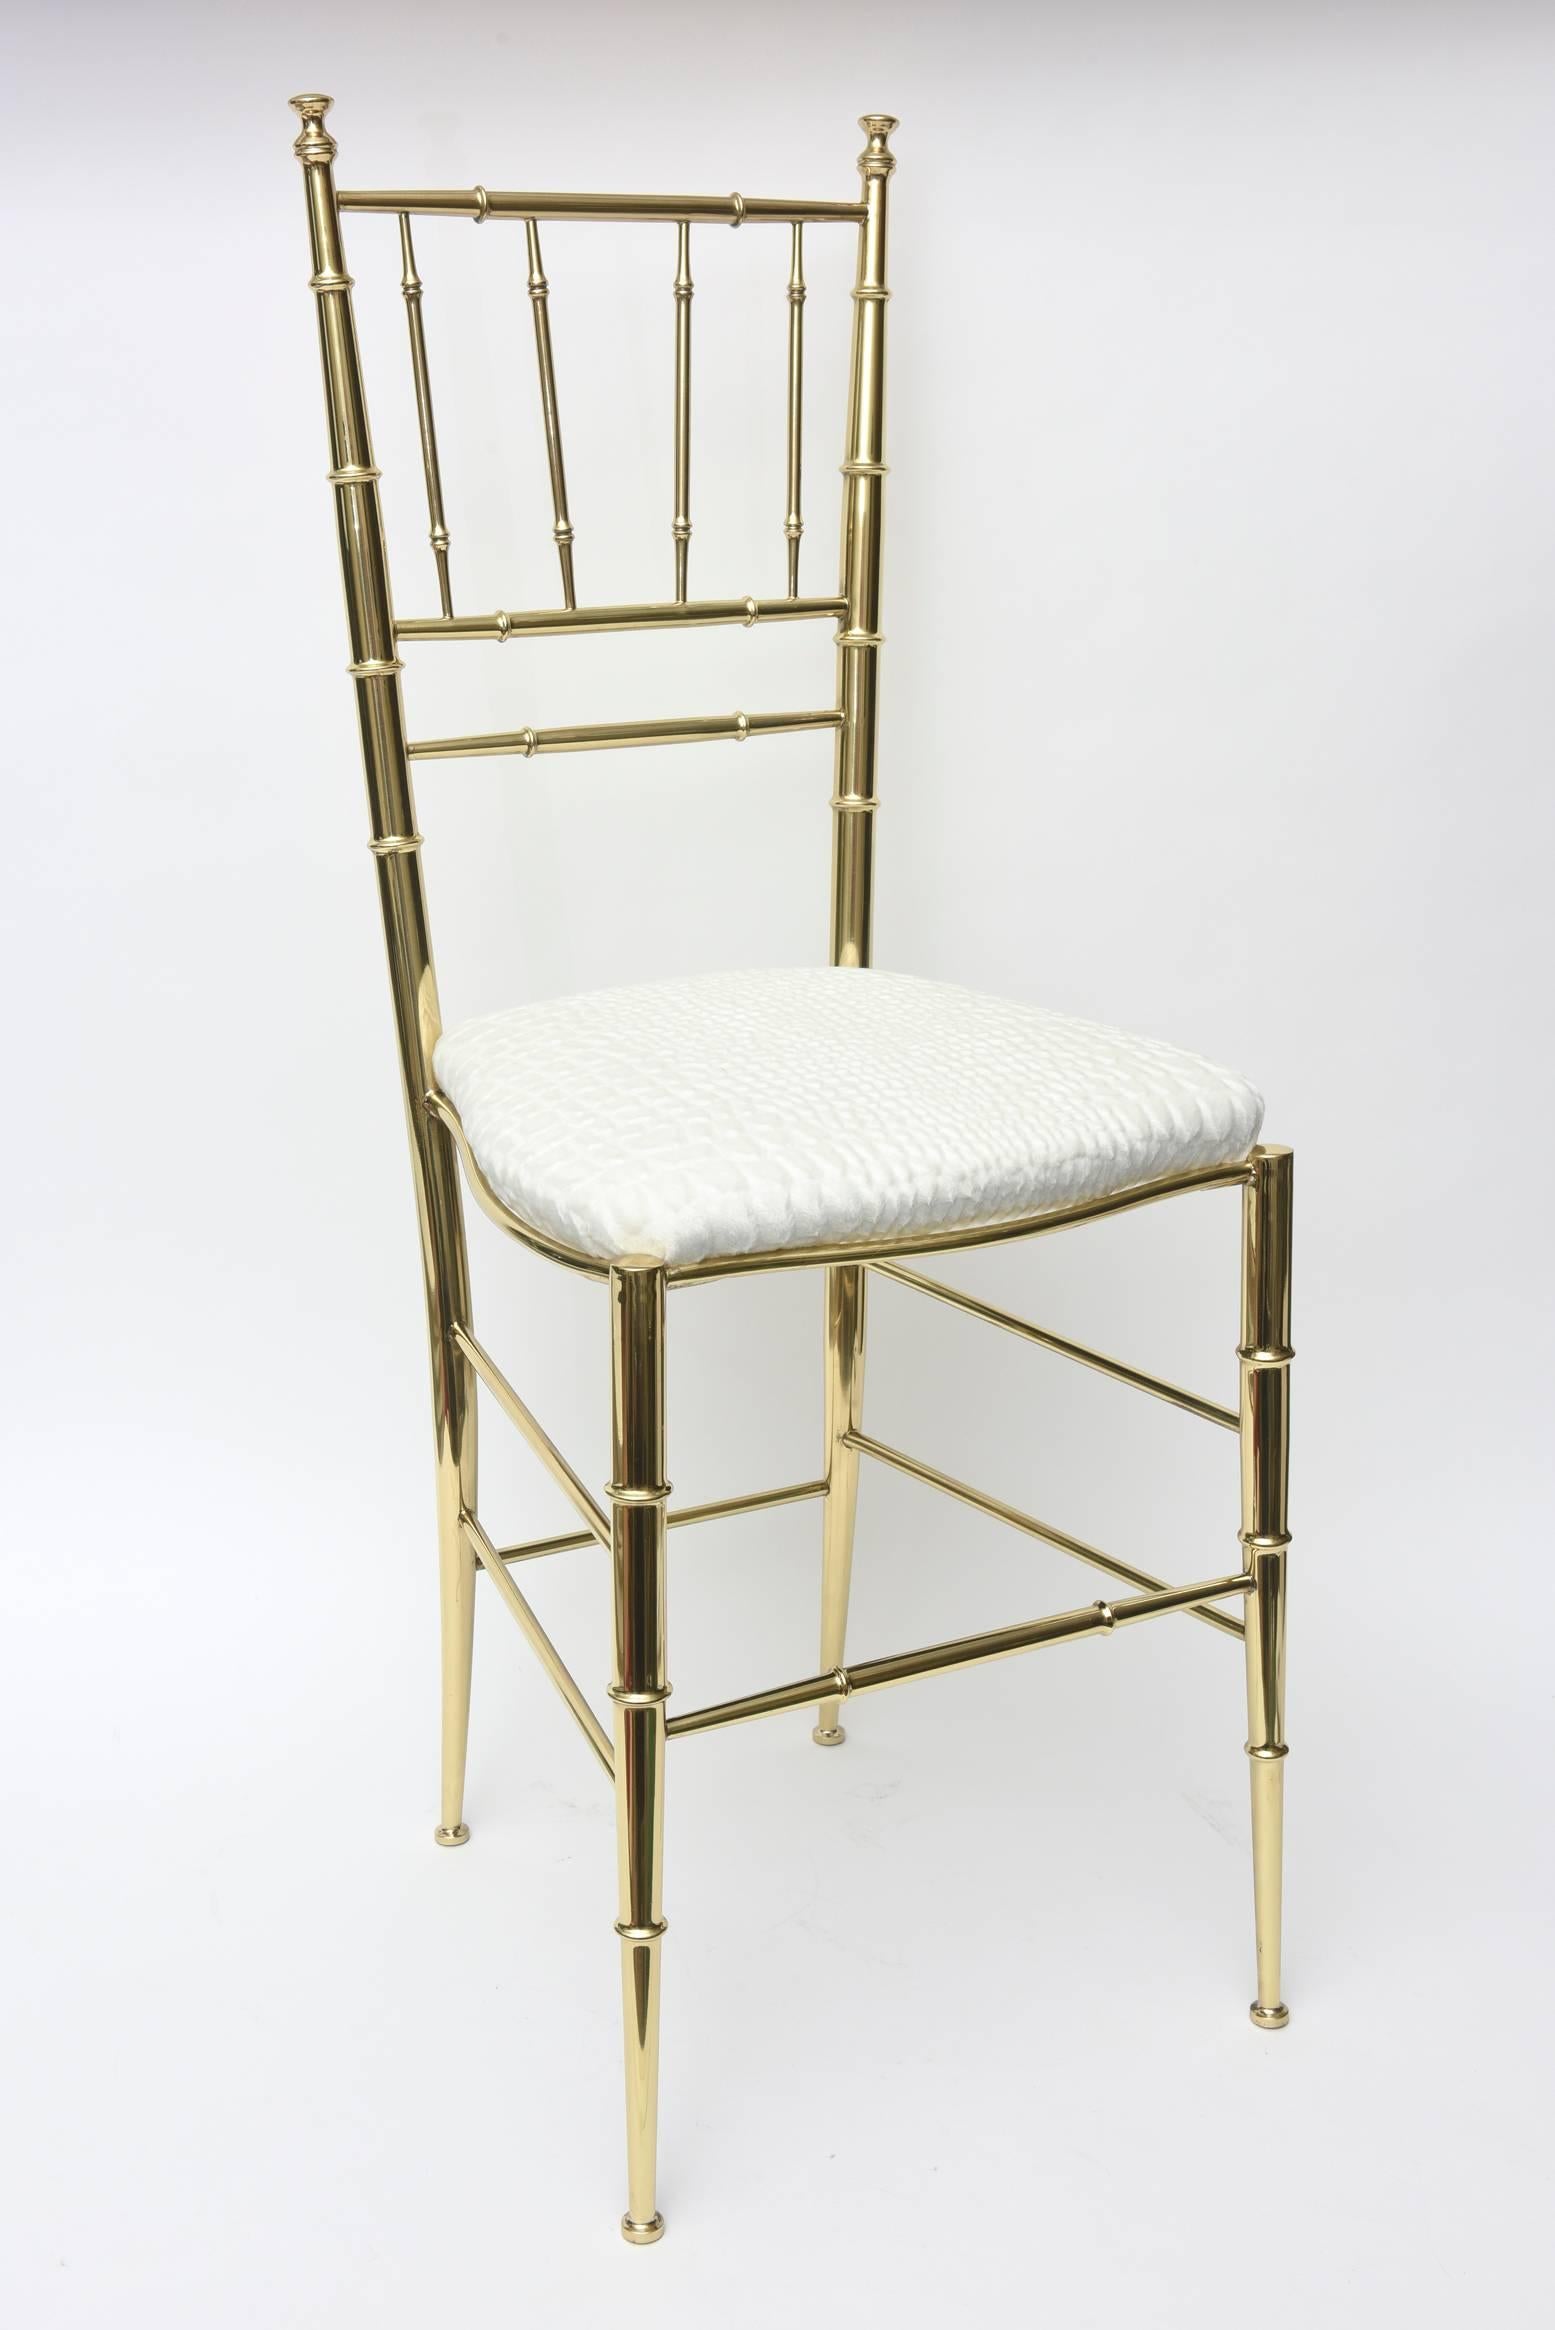 This lovely polished restored brass Italian Mid-Century Modern Chiavari side chair has faux bamboo elements. It has just been re-upholstered in a stunning textural cut velvet crocodile white to off-white upholstery. Tres chic! The brass has been